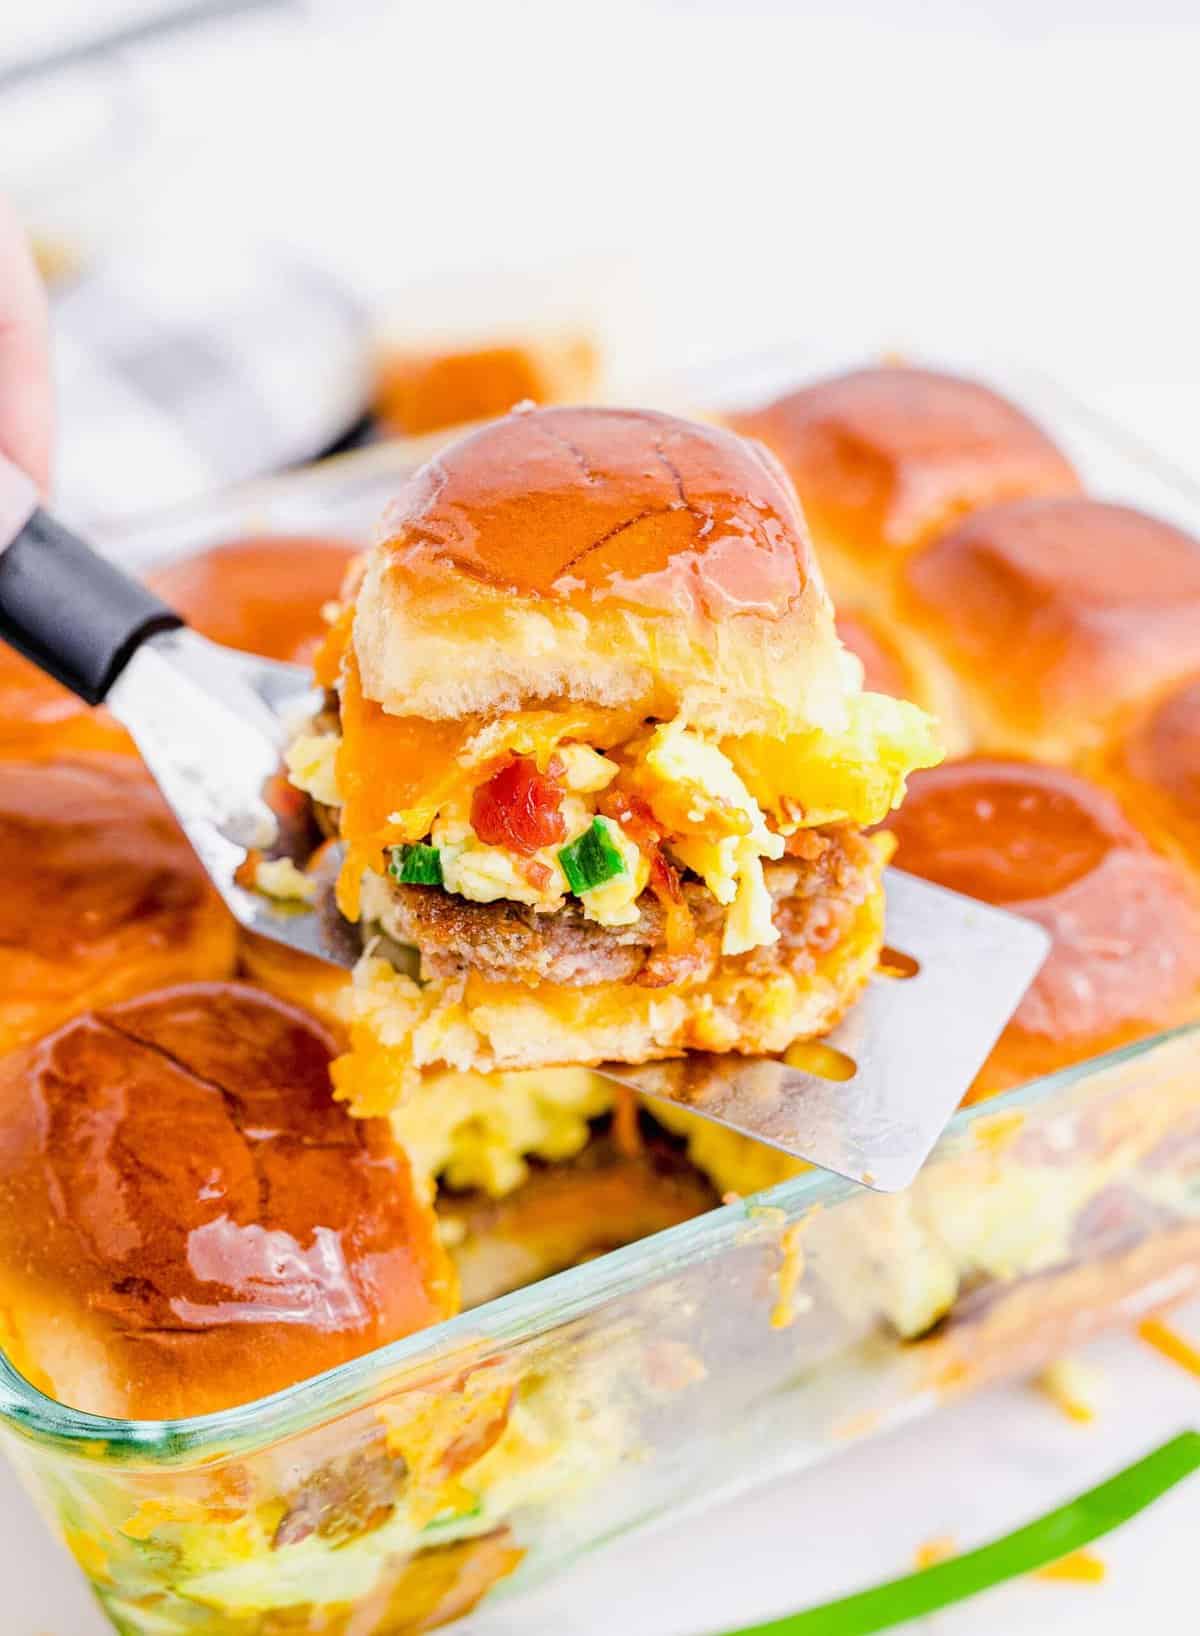 One breakfast slider being removed from baking dish